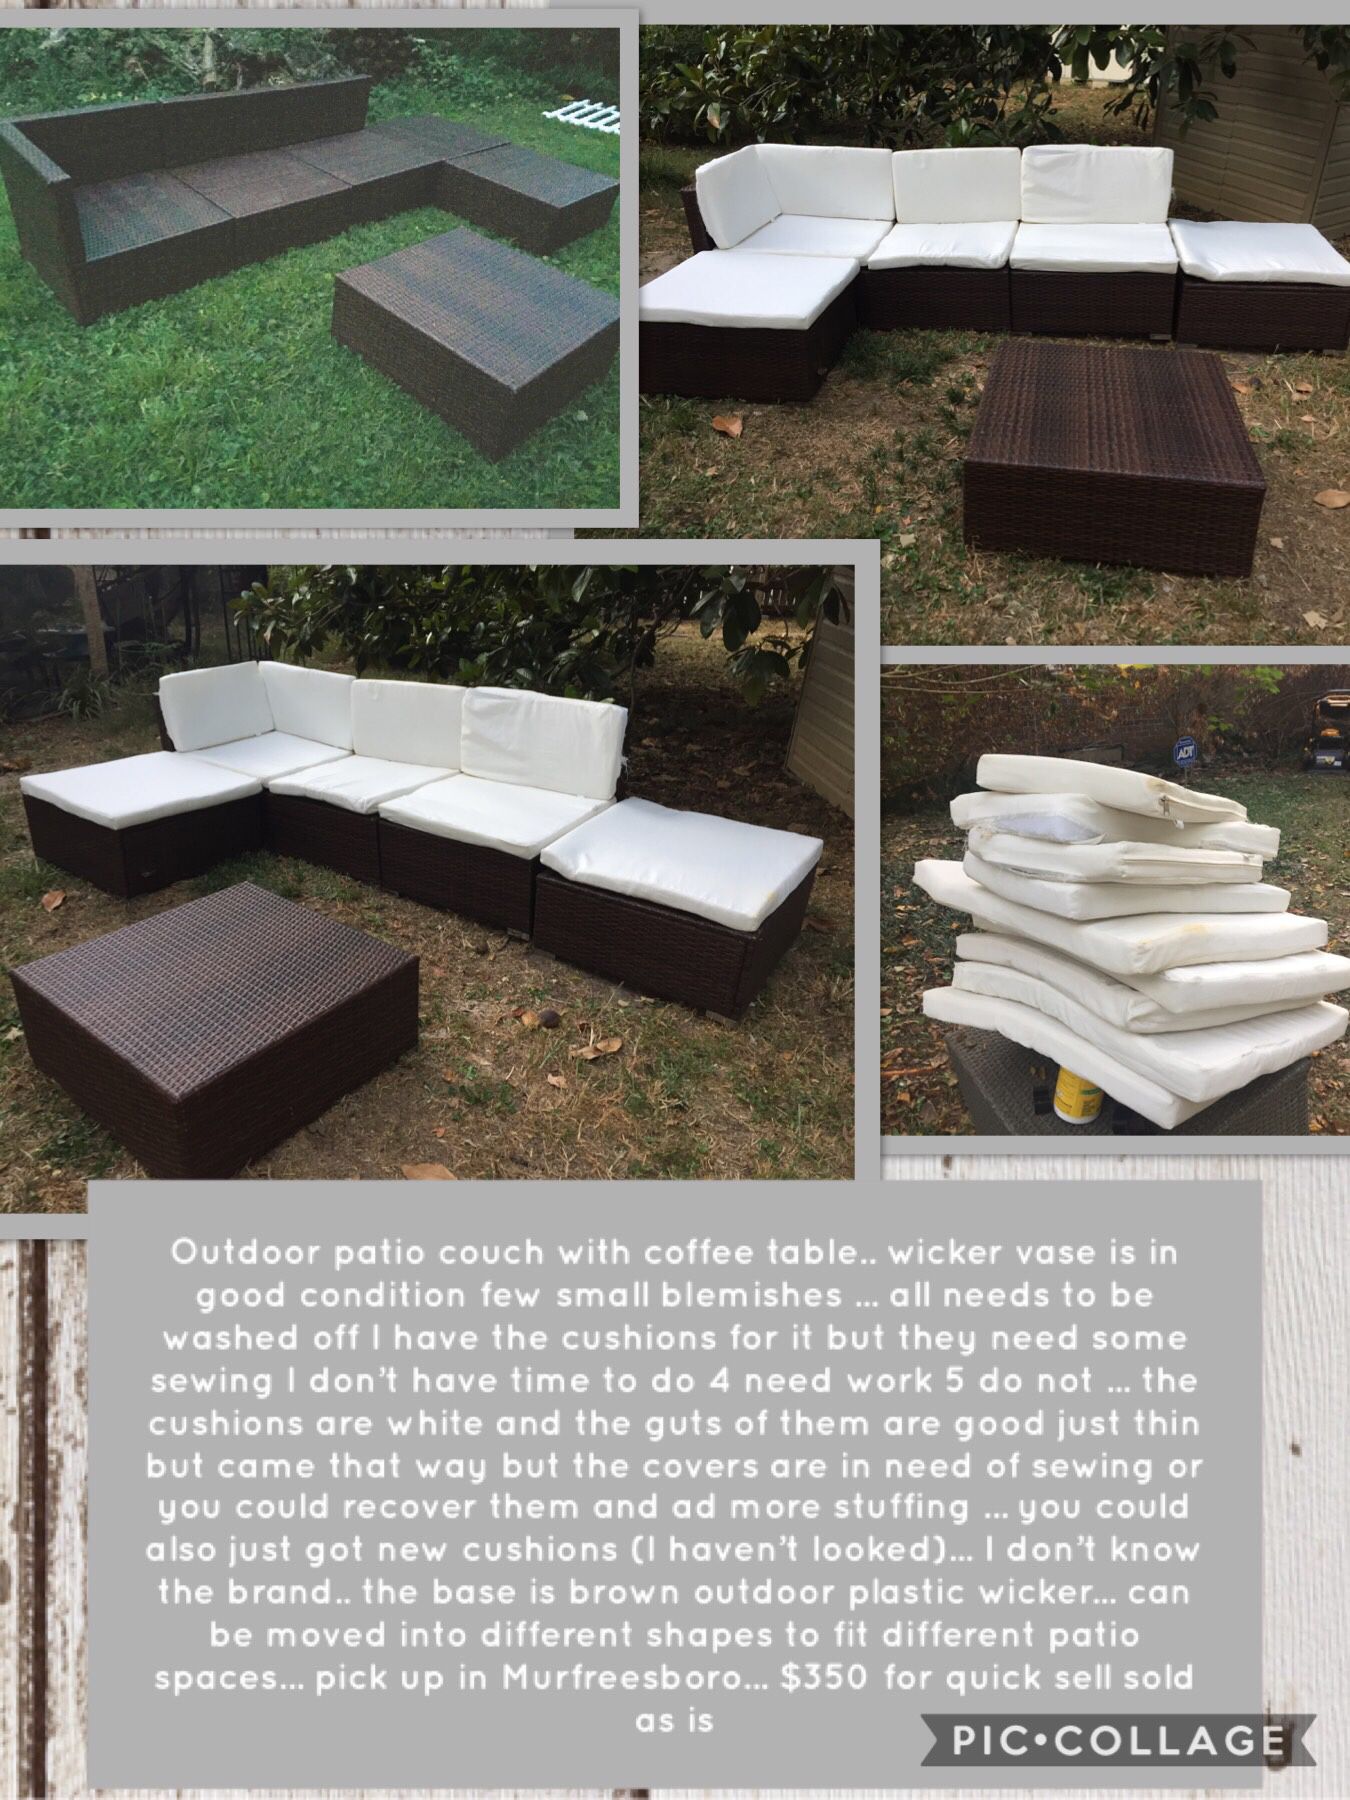 Outdoor patio couch with coffee table.. wicker vase is in good condition few small blemishes ... all needs to be washed off I have the cushions for i